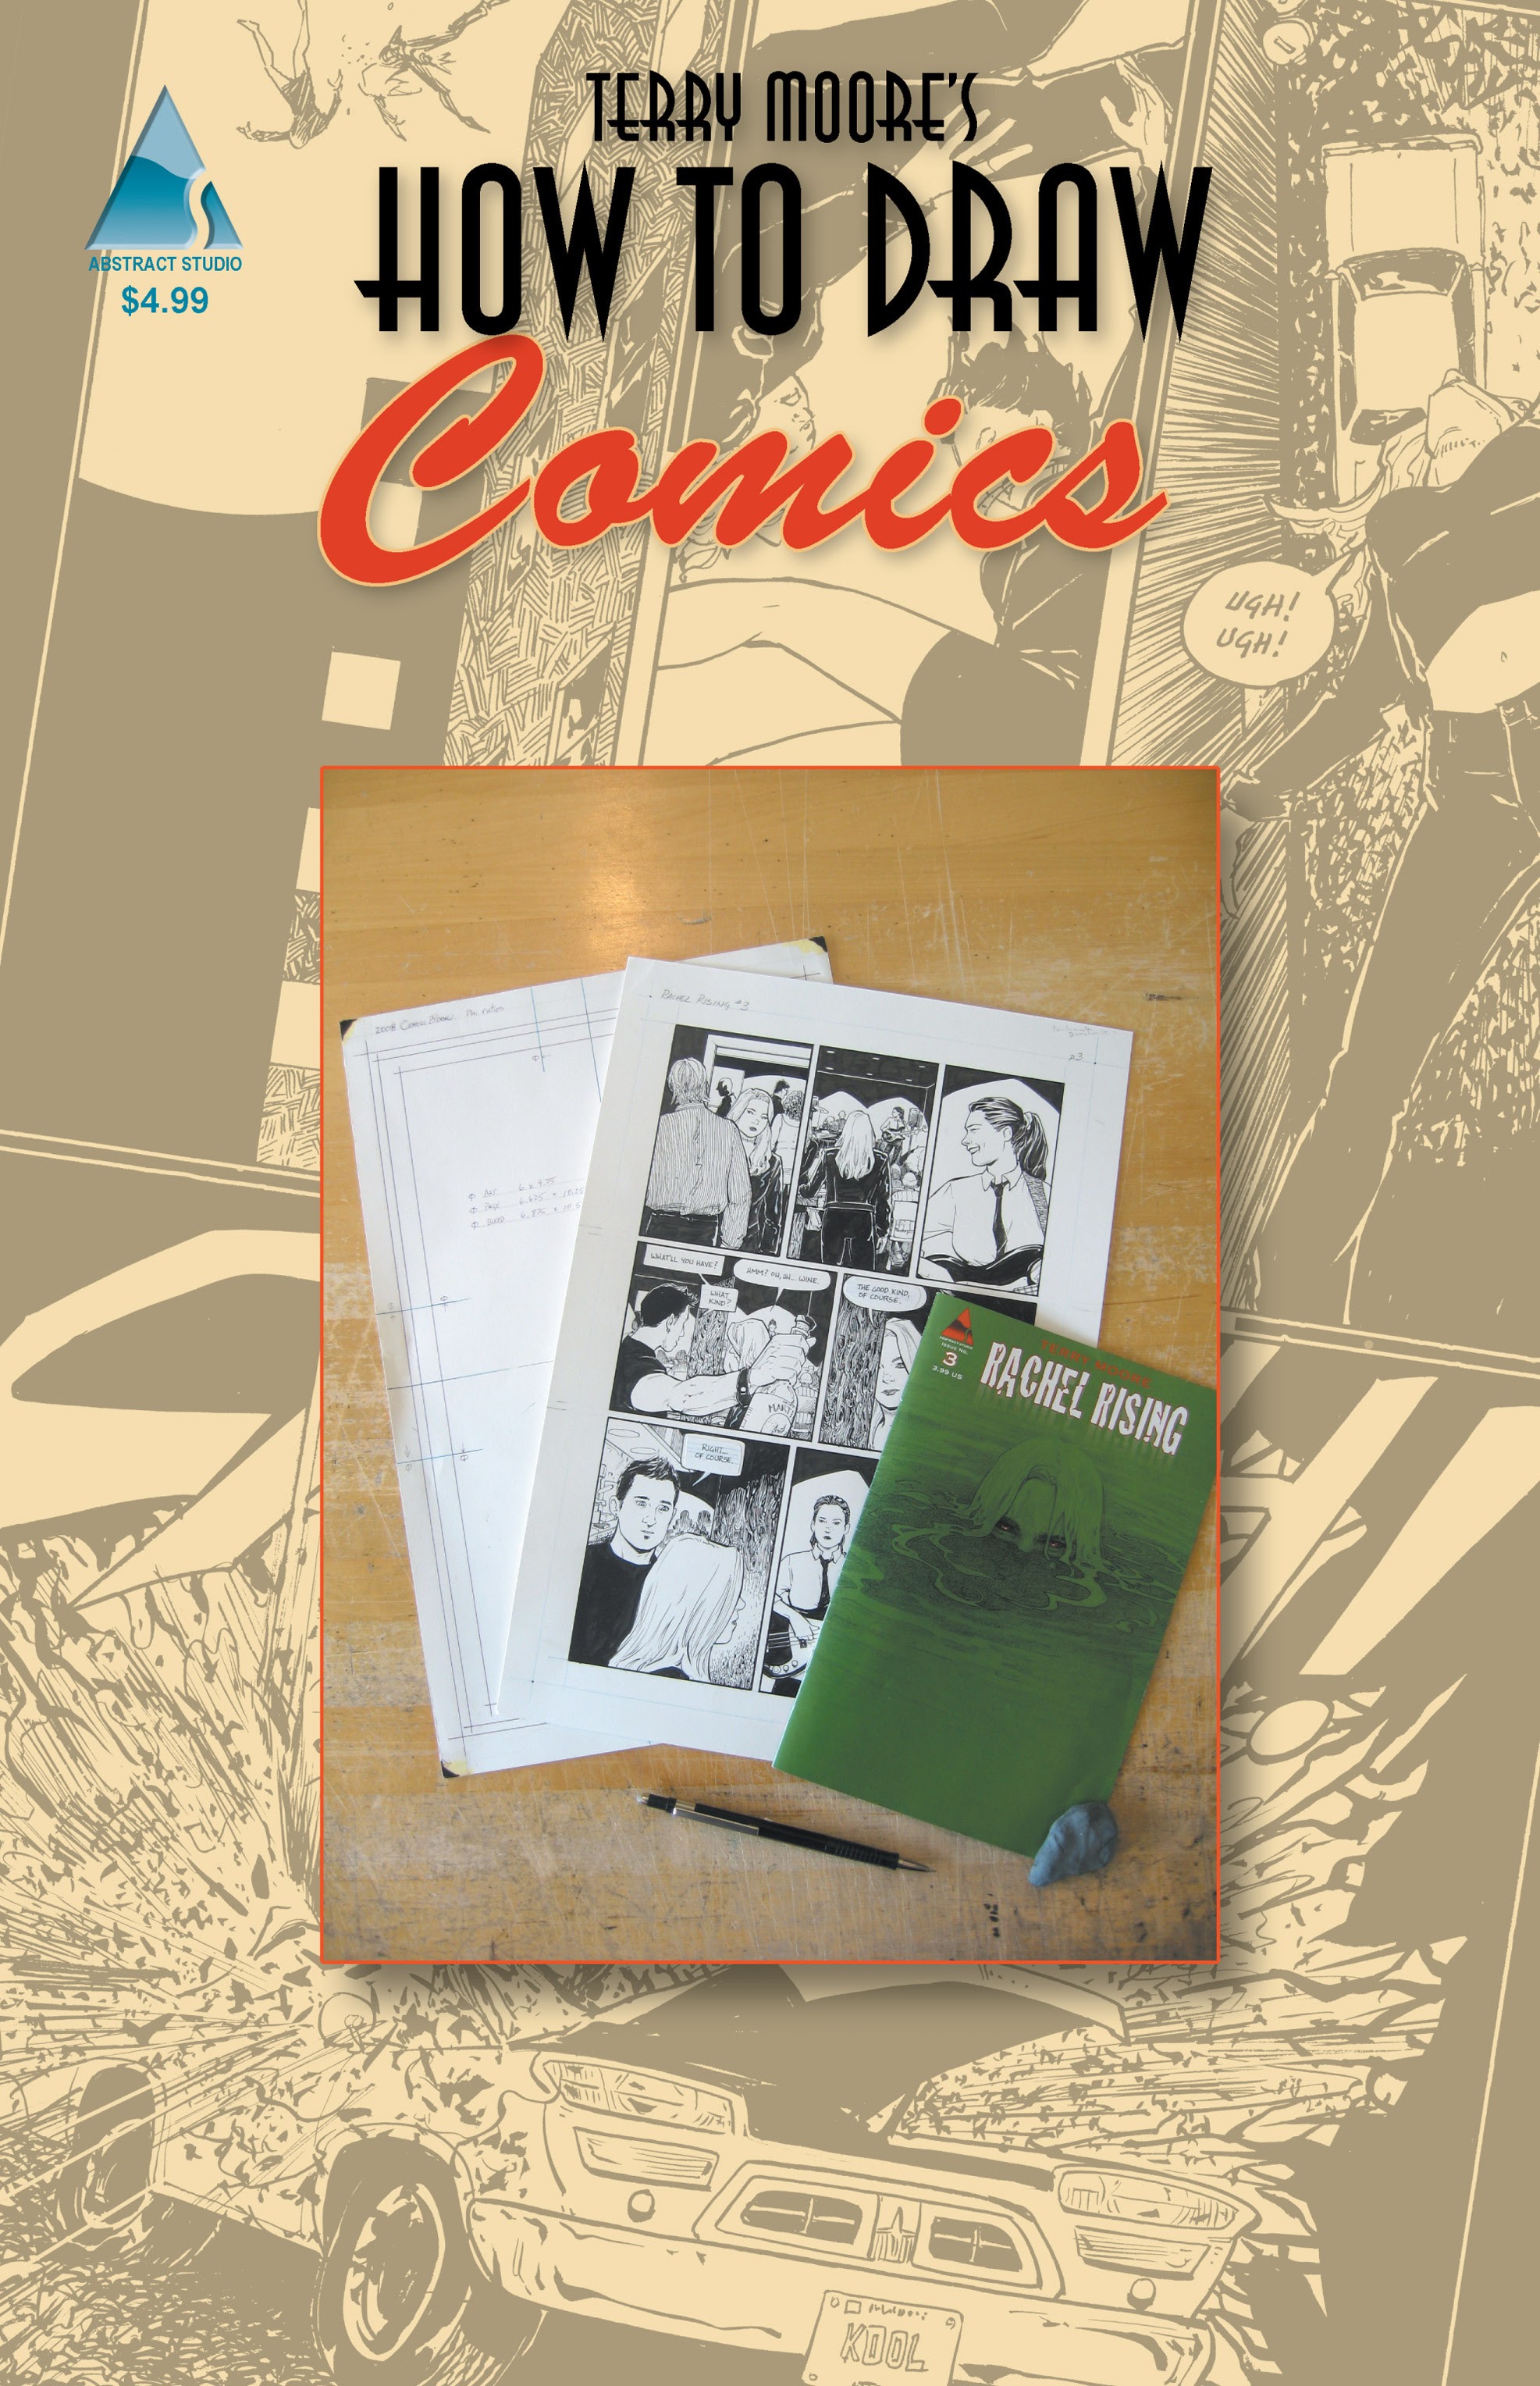 Read online Terry Moore's How to Draw... comic -  Issue # Comics - 1